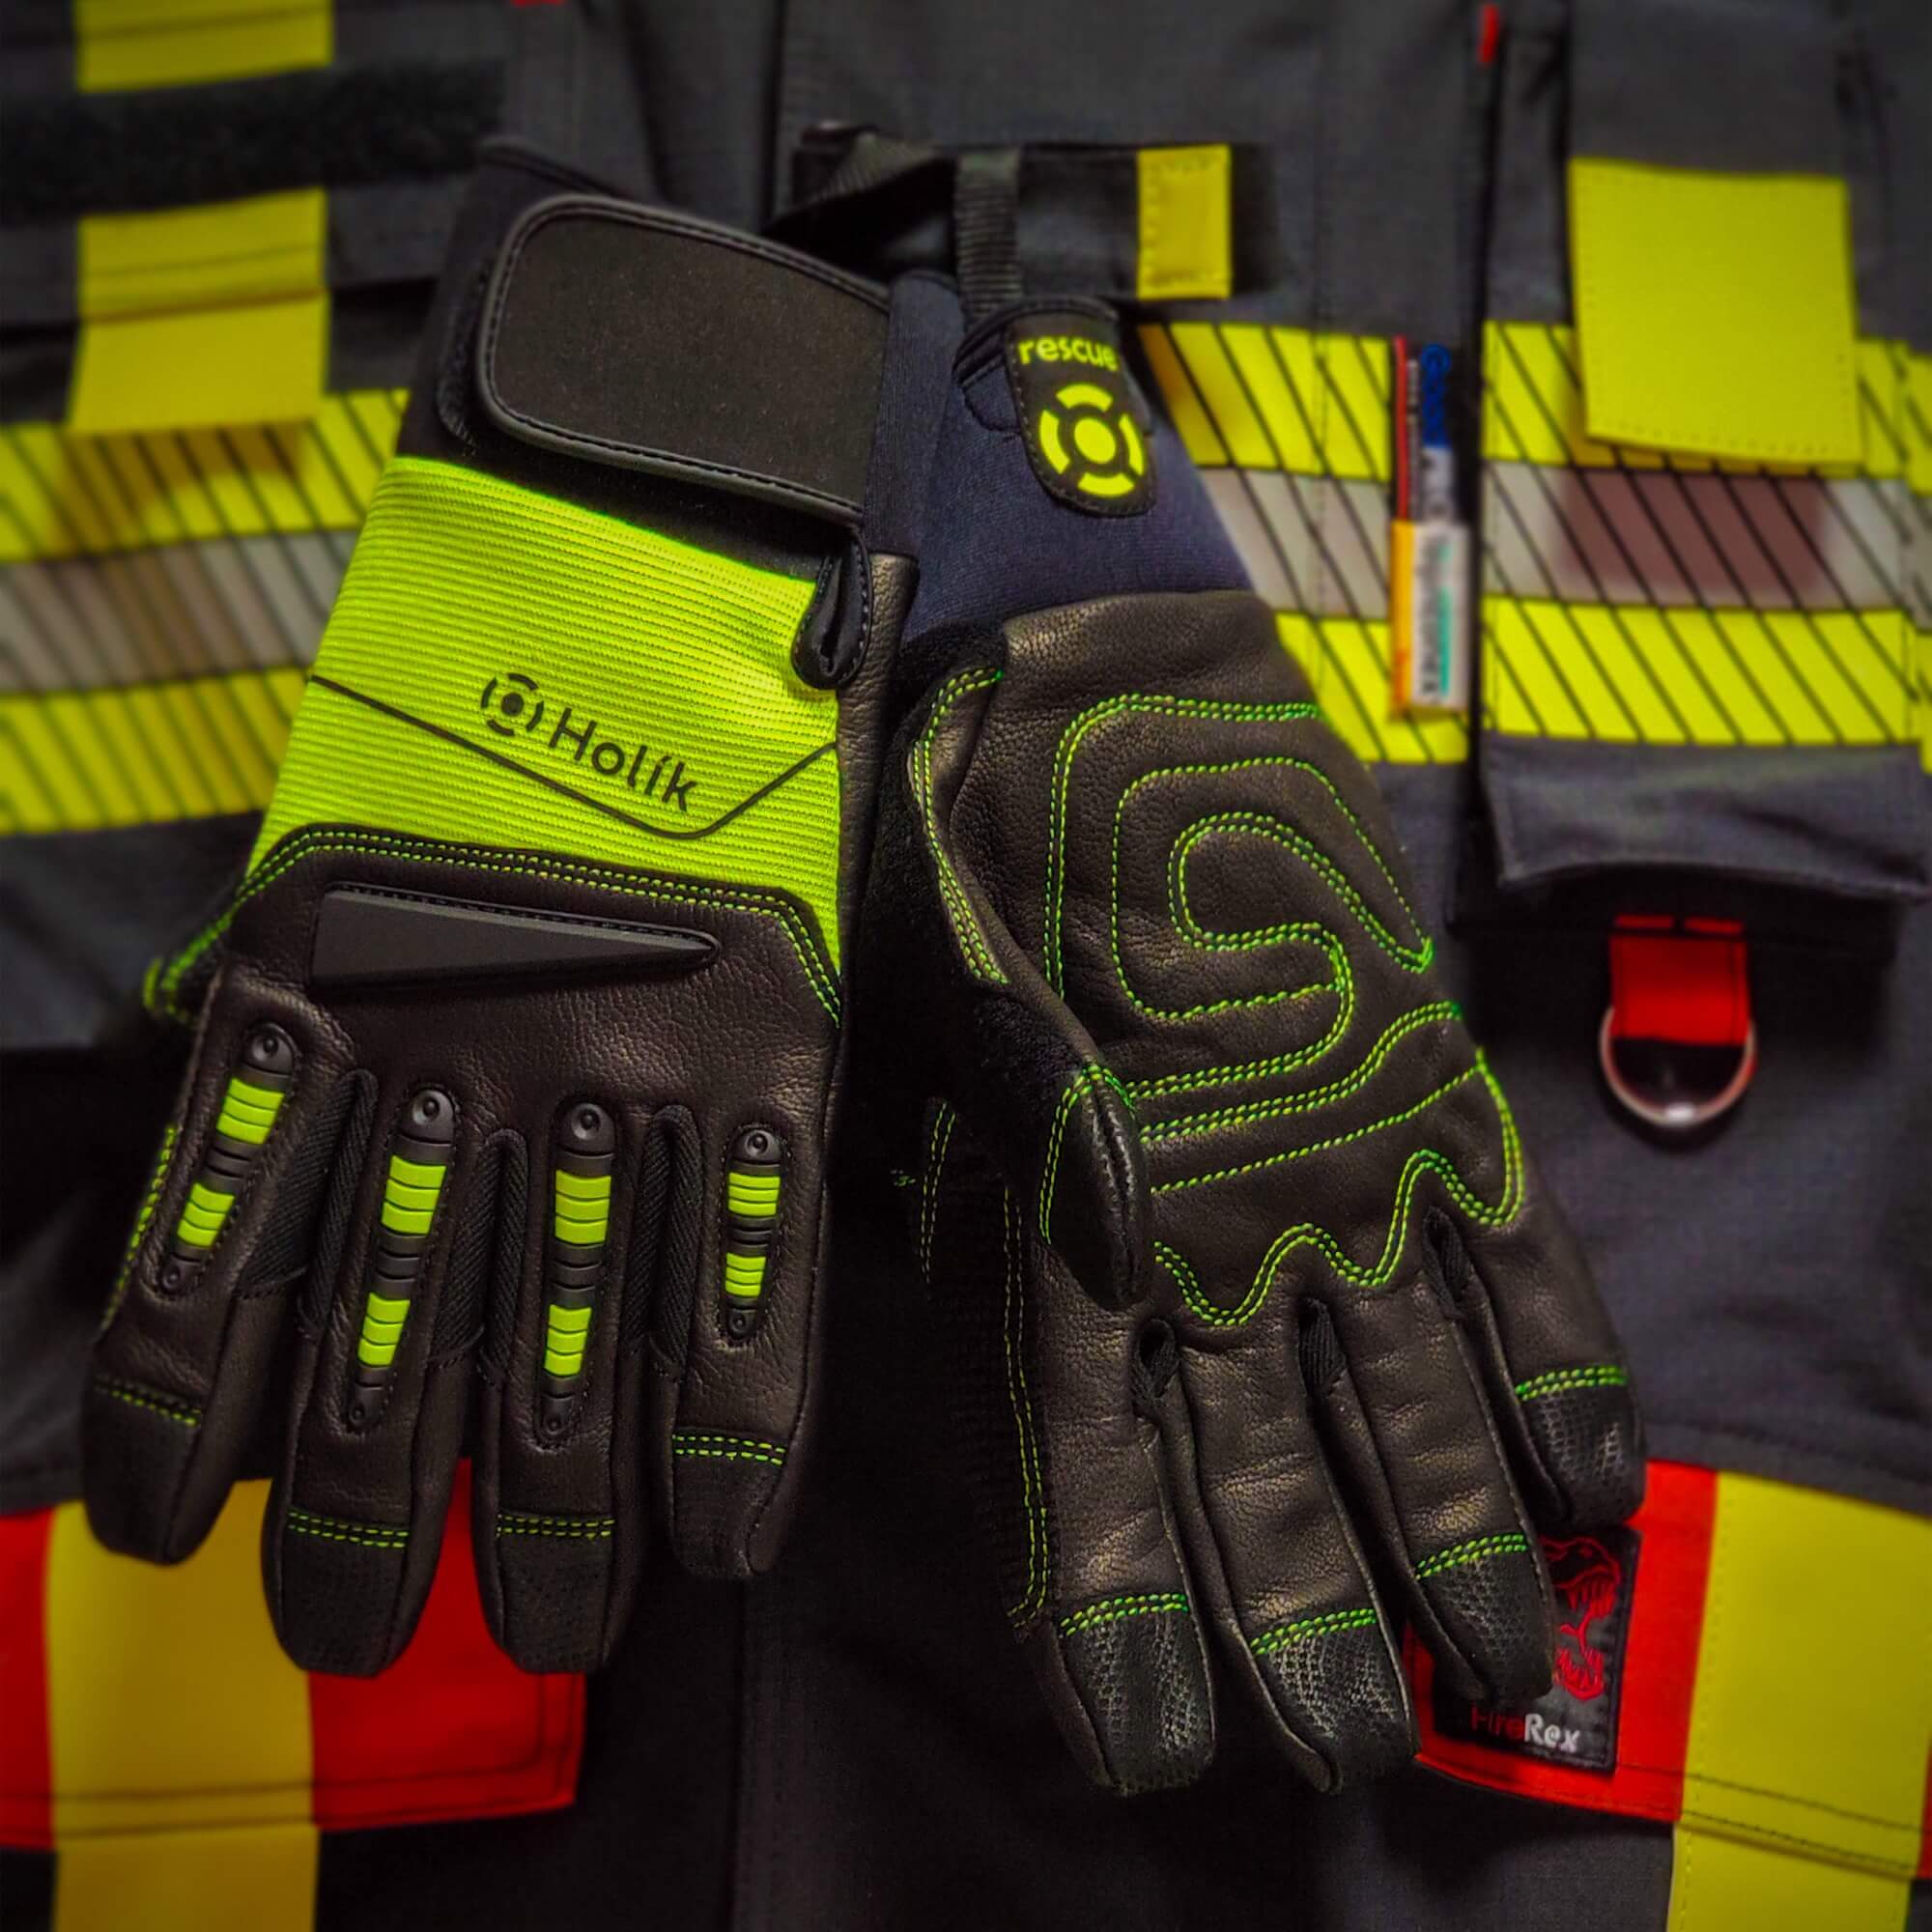 Emergency gloves for rescuers Penelope Plus Green